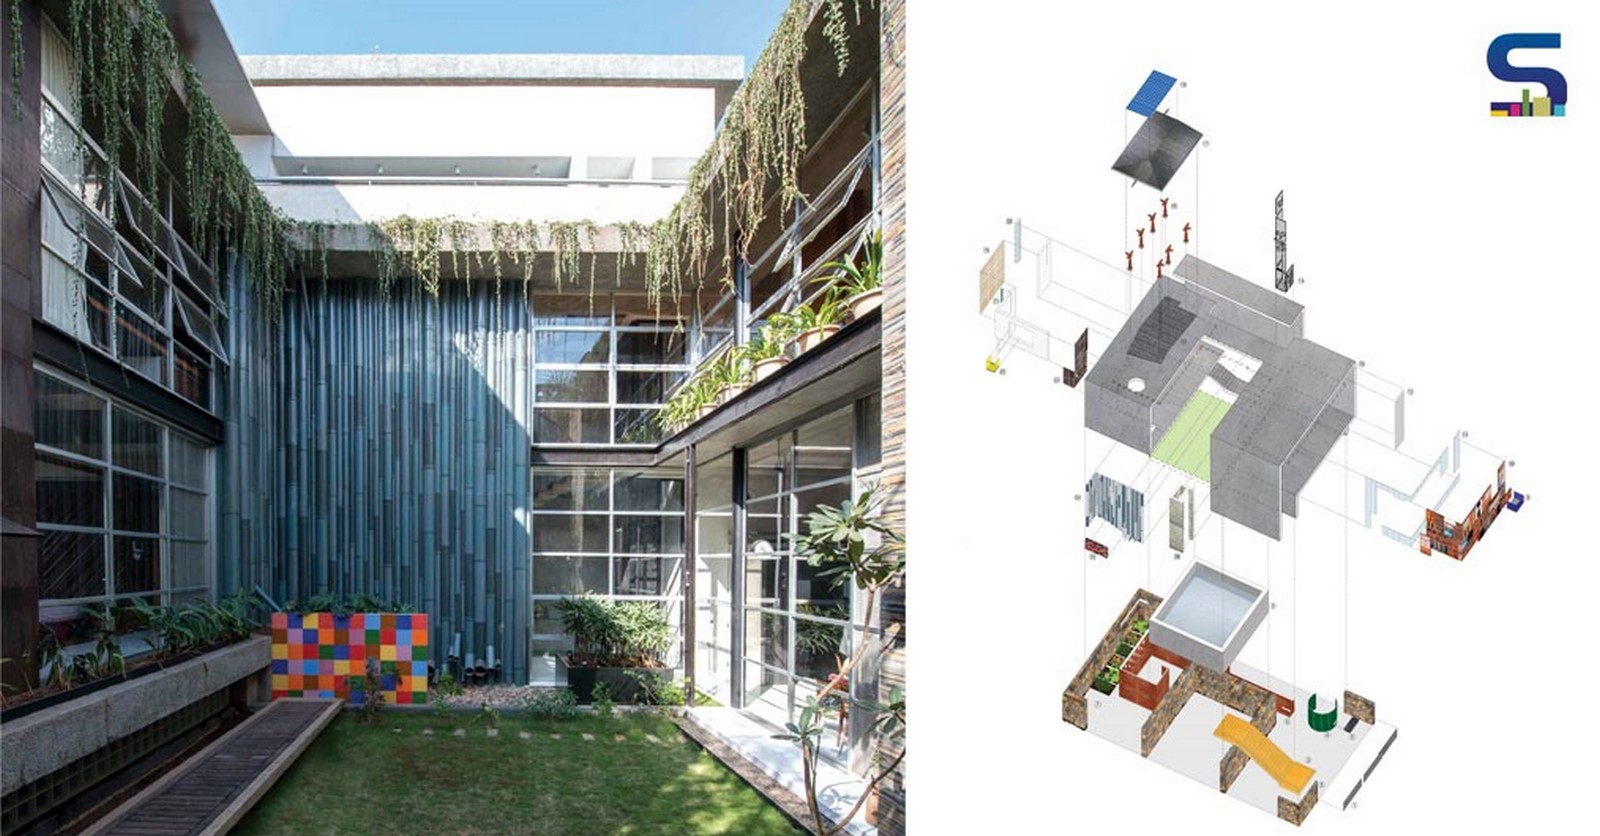 6 Architectural Projects Made Out of Recycled Materials